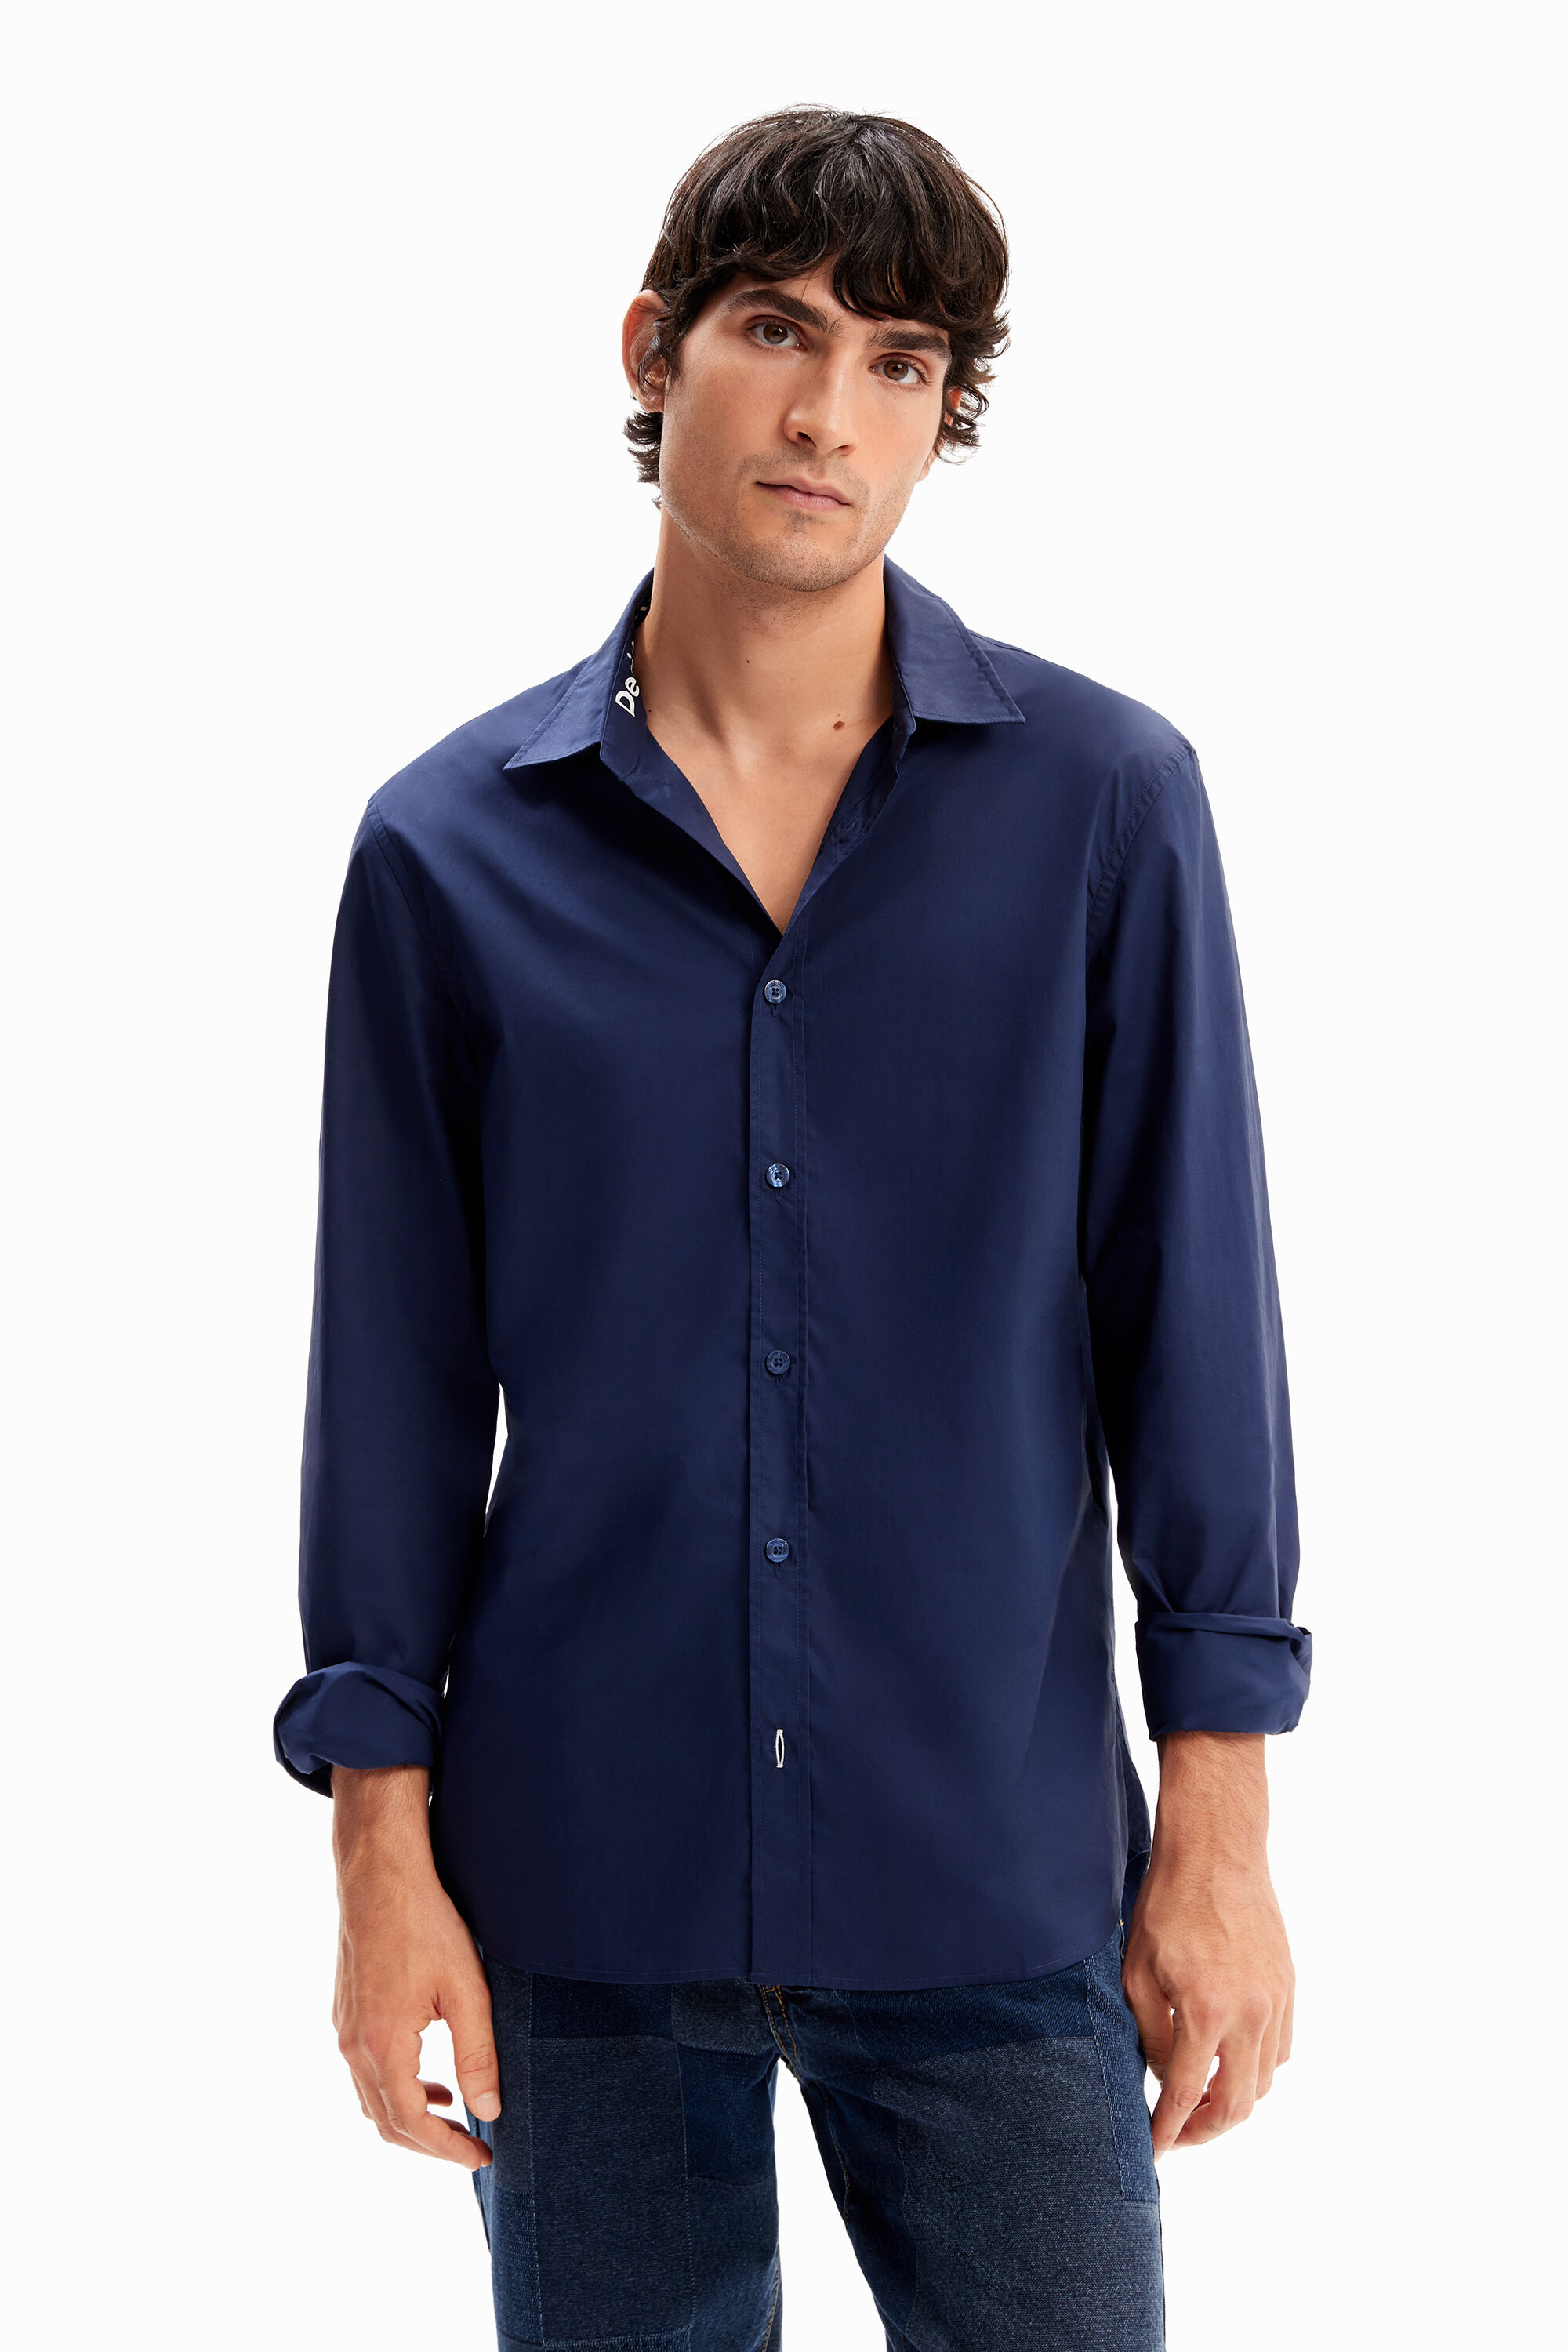 Desigual Basic shirt with contrasting details